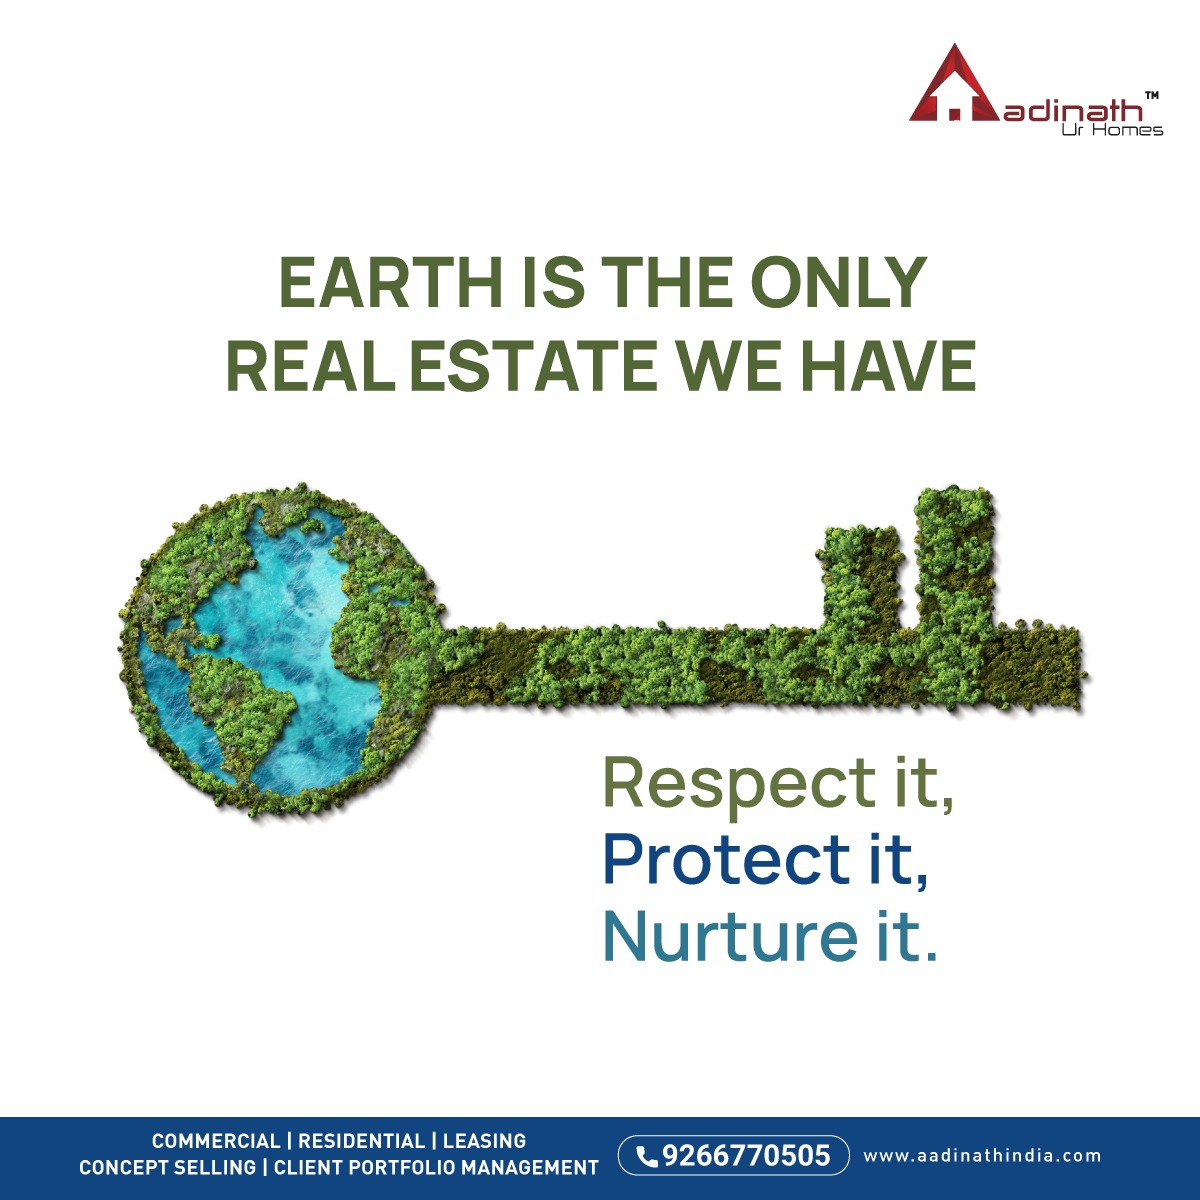 Let's invest our resources and dedication to build a better planet. #WorldEarthDay #RespectEarth #SaveOurPlanet #EnvironmentalResponsibility #GoGreen #EarthAdvocacy #GlobalCitizenship #AadinathIndia #AadinathUrHomes #OfficeSpace #RetailSpace